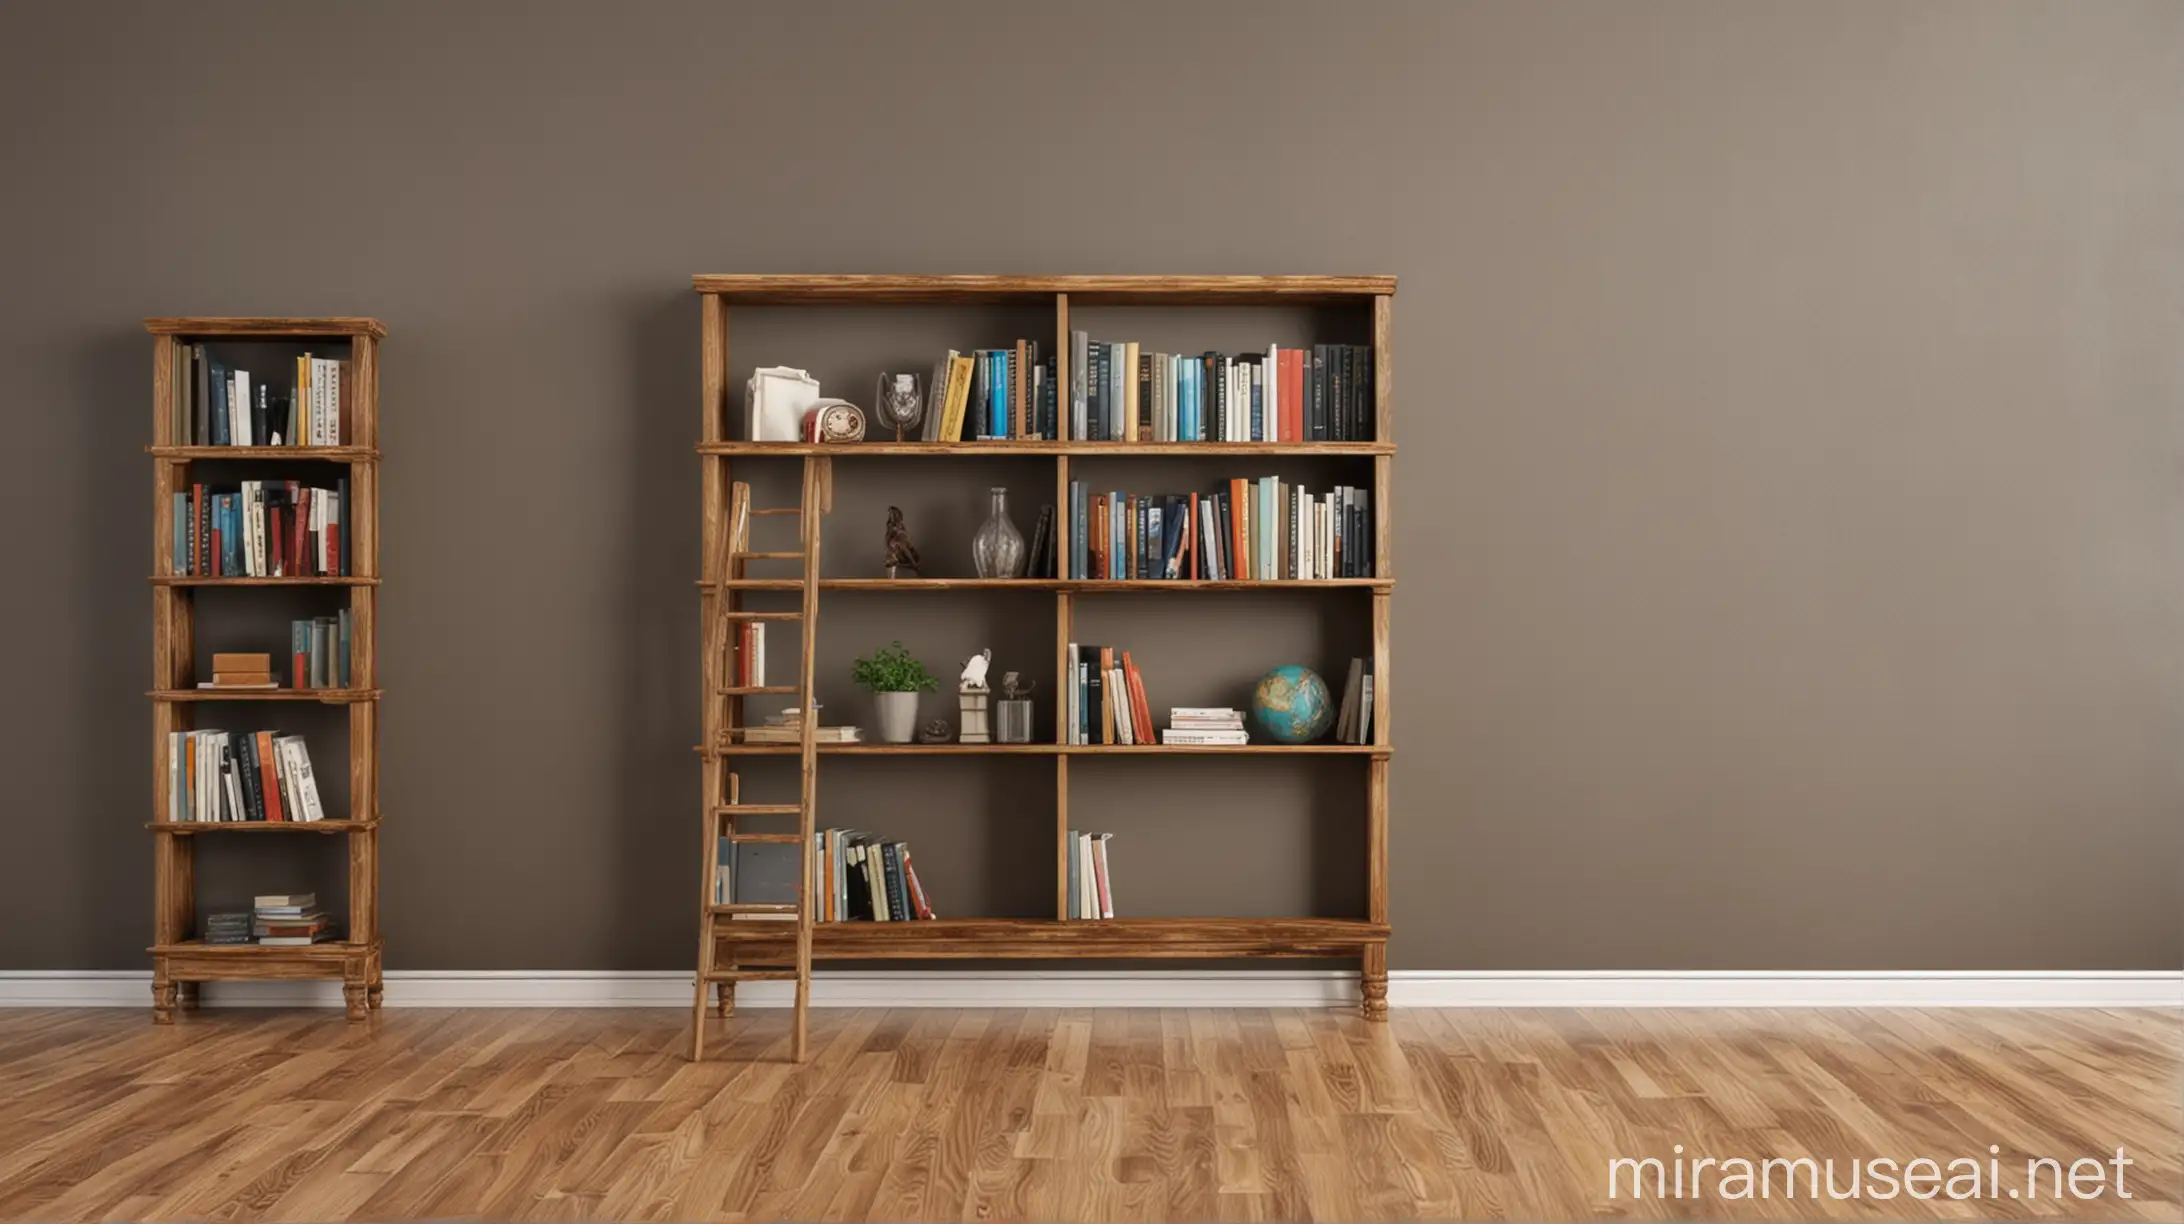 Create room background wall with book shelf